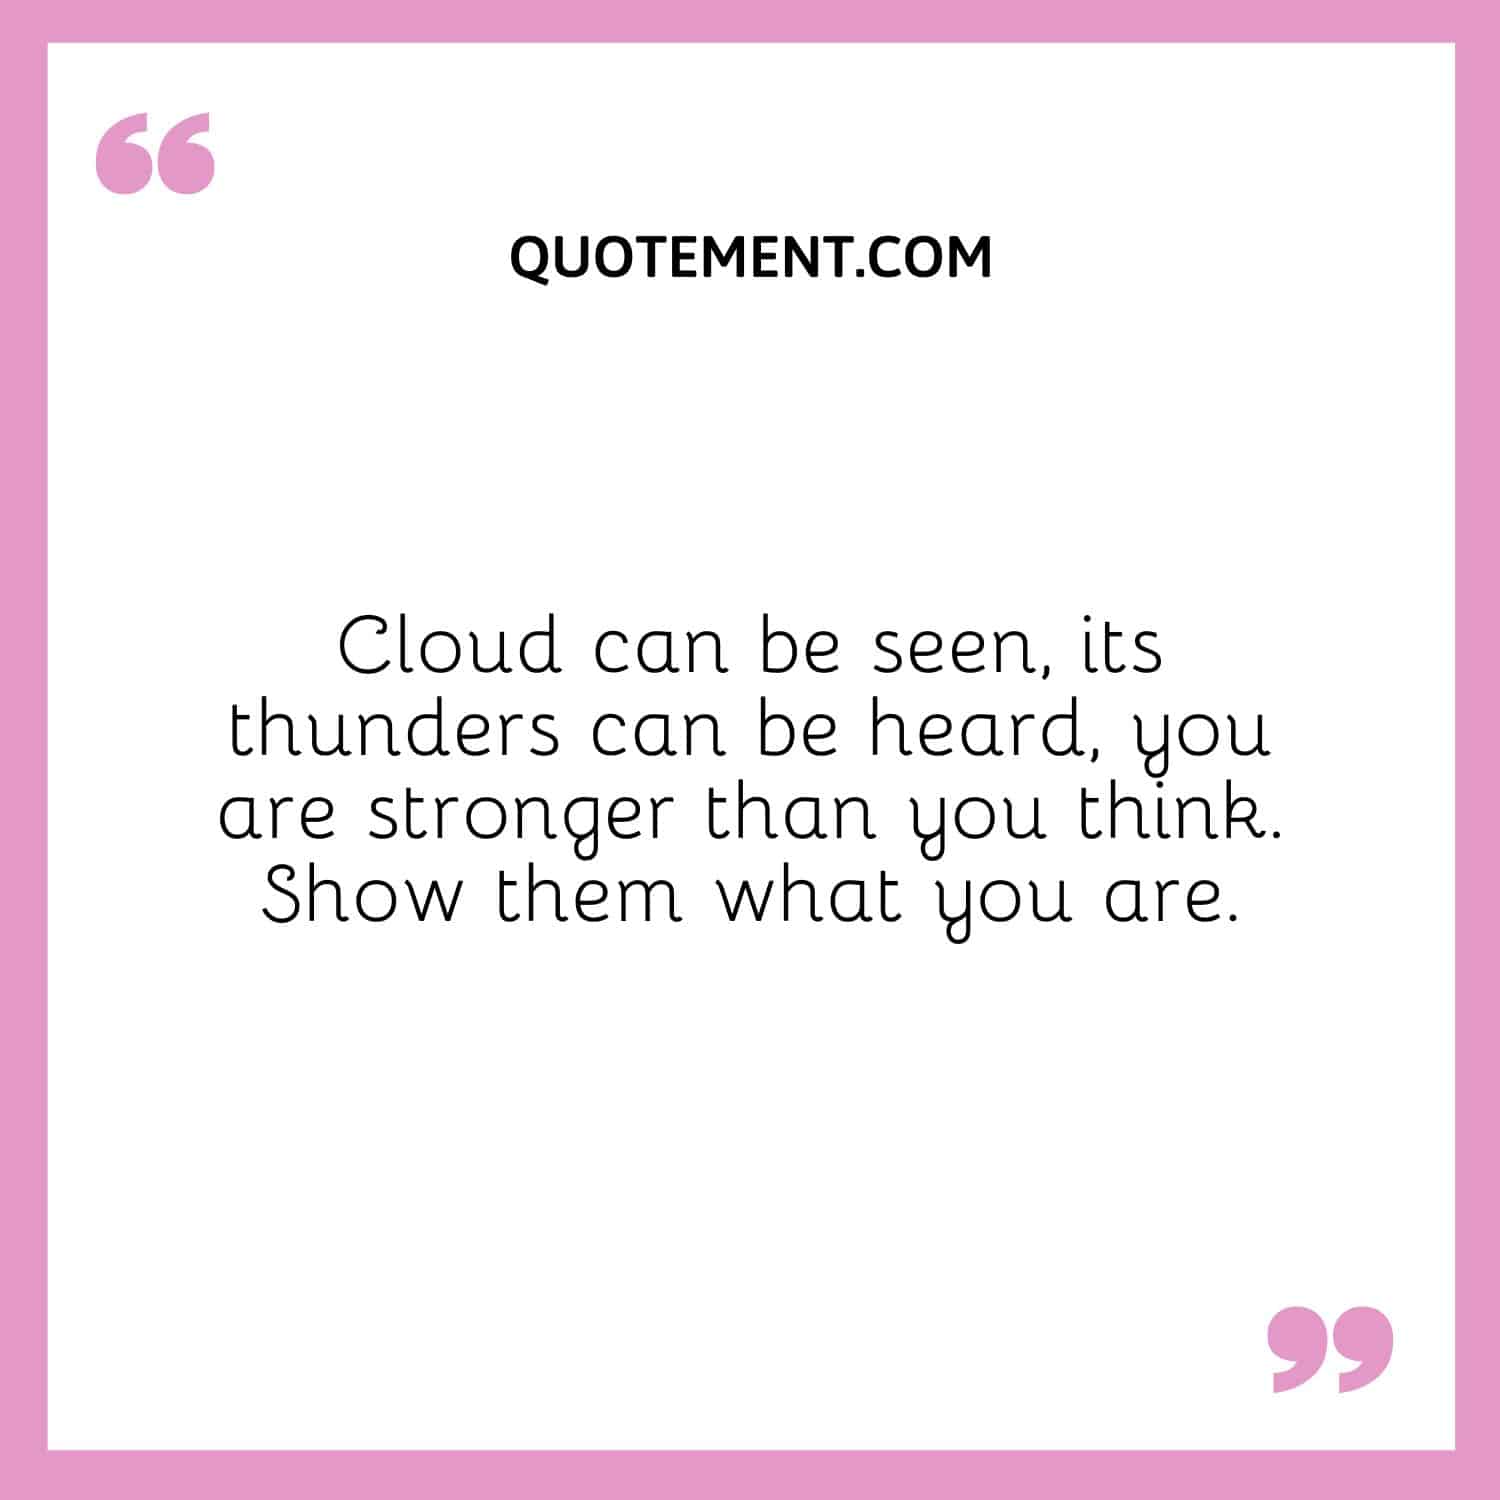 Cloud can be seen, its thunders can be heard, you are stronger than you think. Show them what you are.